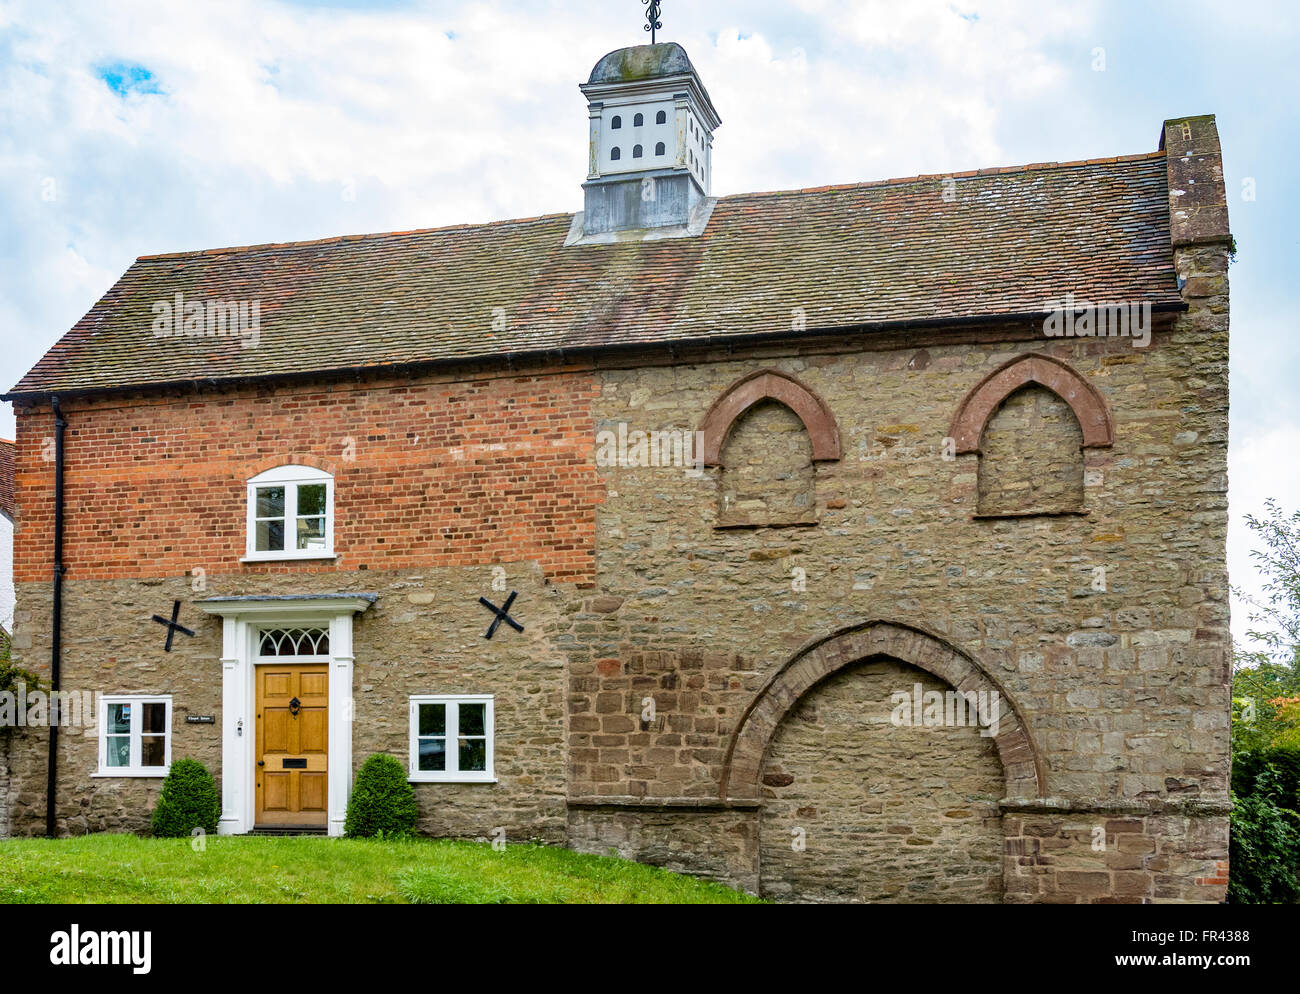 Chapel of St. Thomas, Ludlow, Shropshire, England, UK. 12th century with a later building added. Stock Photo